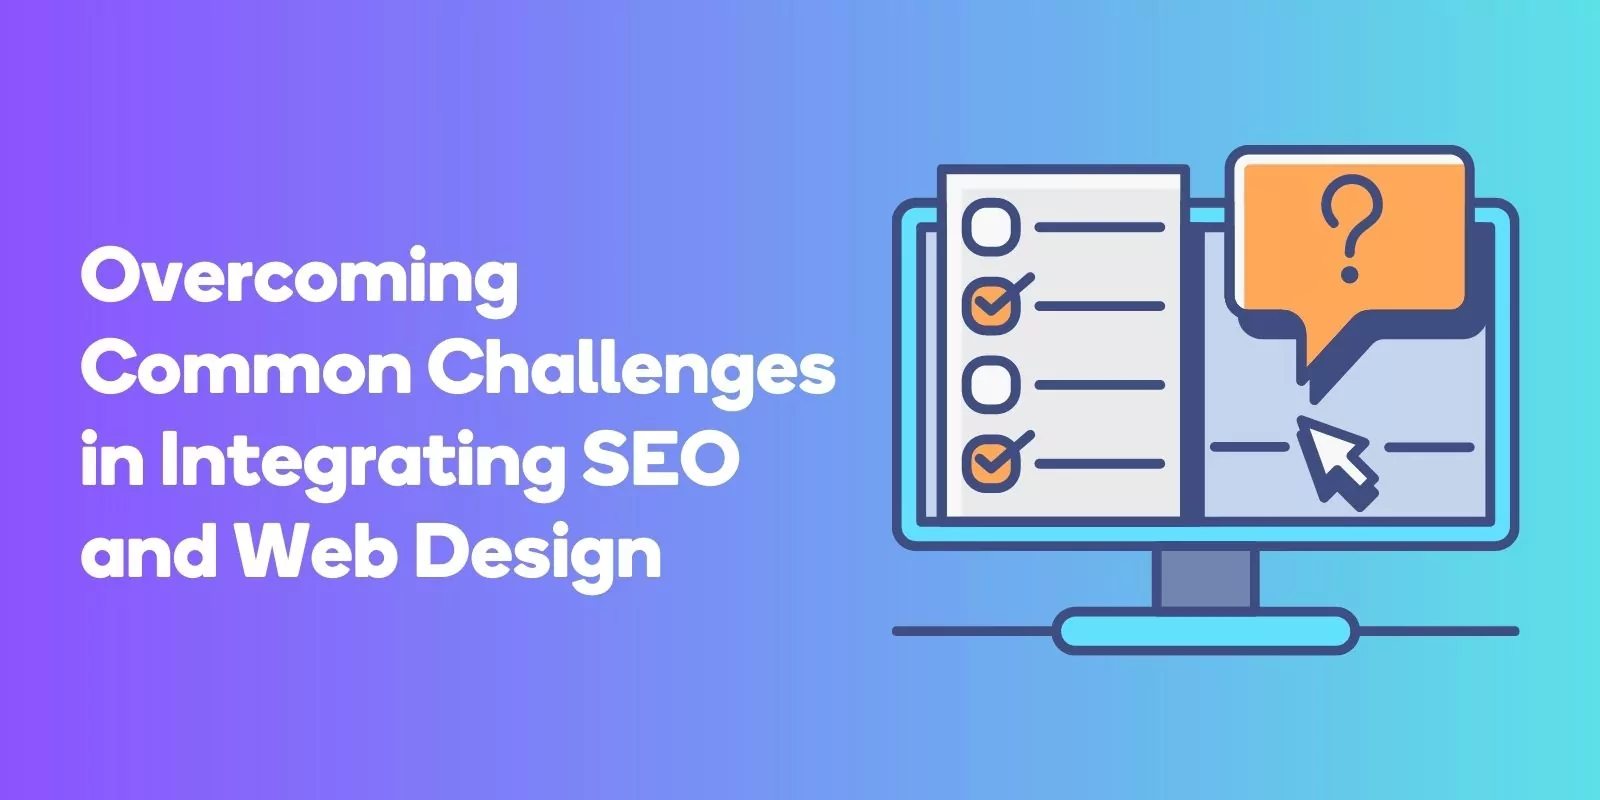 Overcoming Common Challenges in Integrating SEO and Web Design